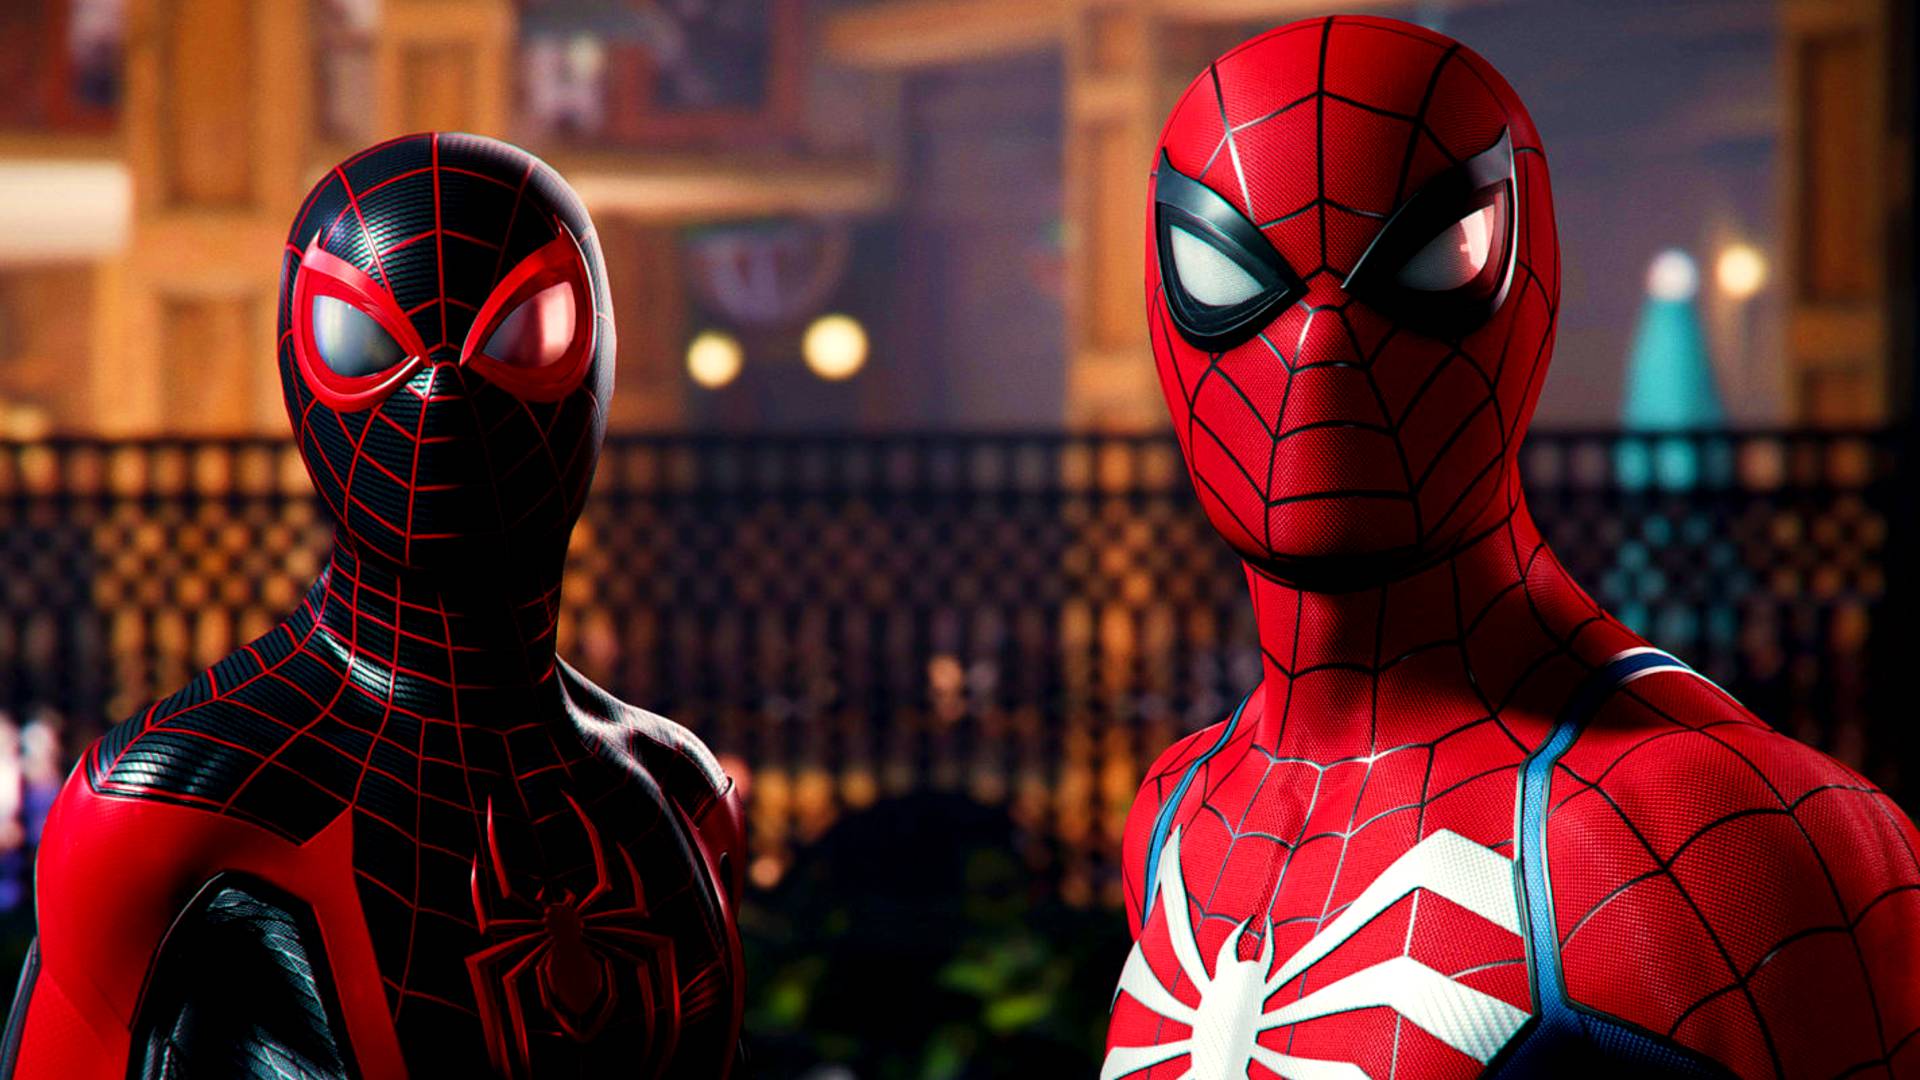 Marvel's Spider-Man 2 release date rumours, trailers, and more | The Loadout